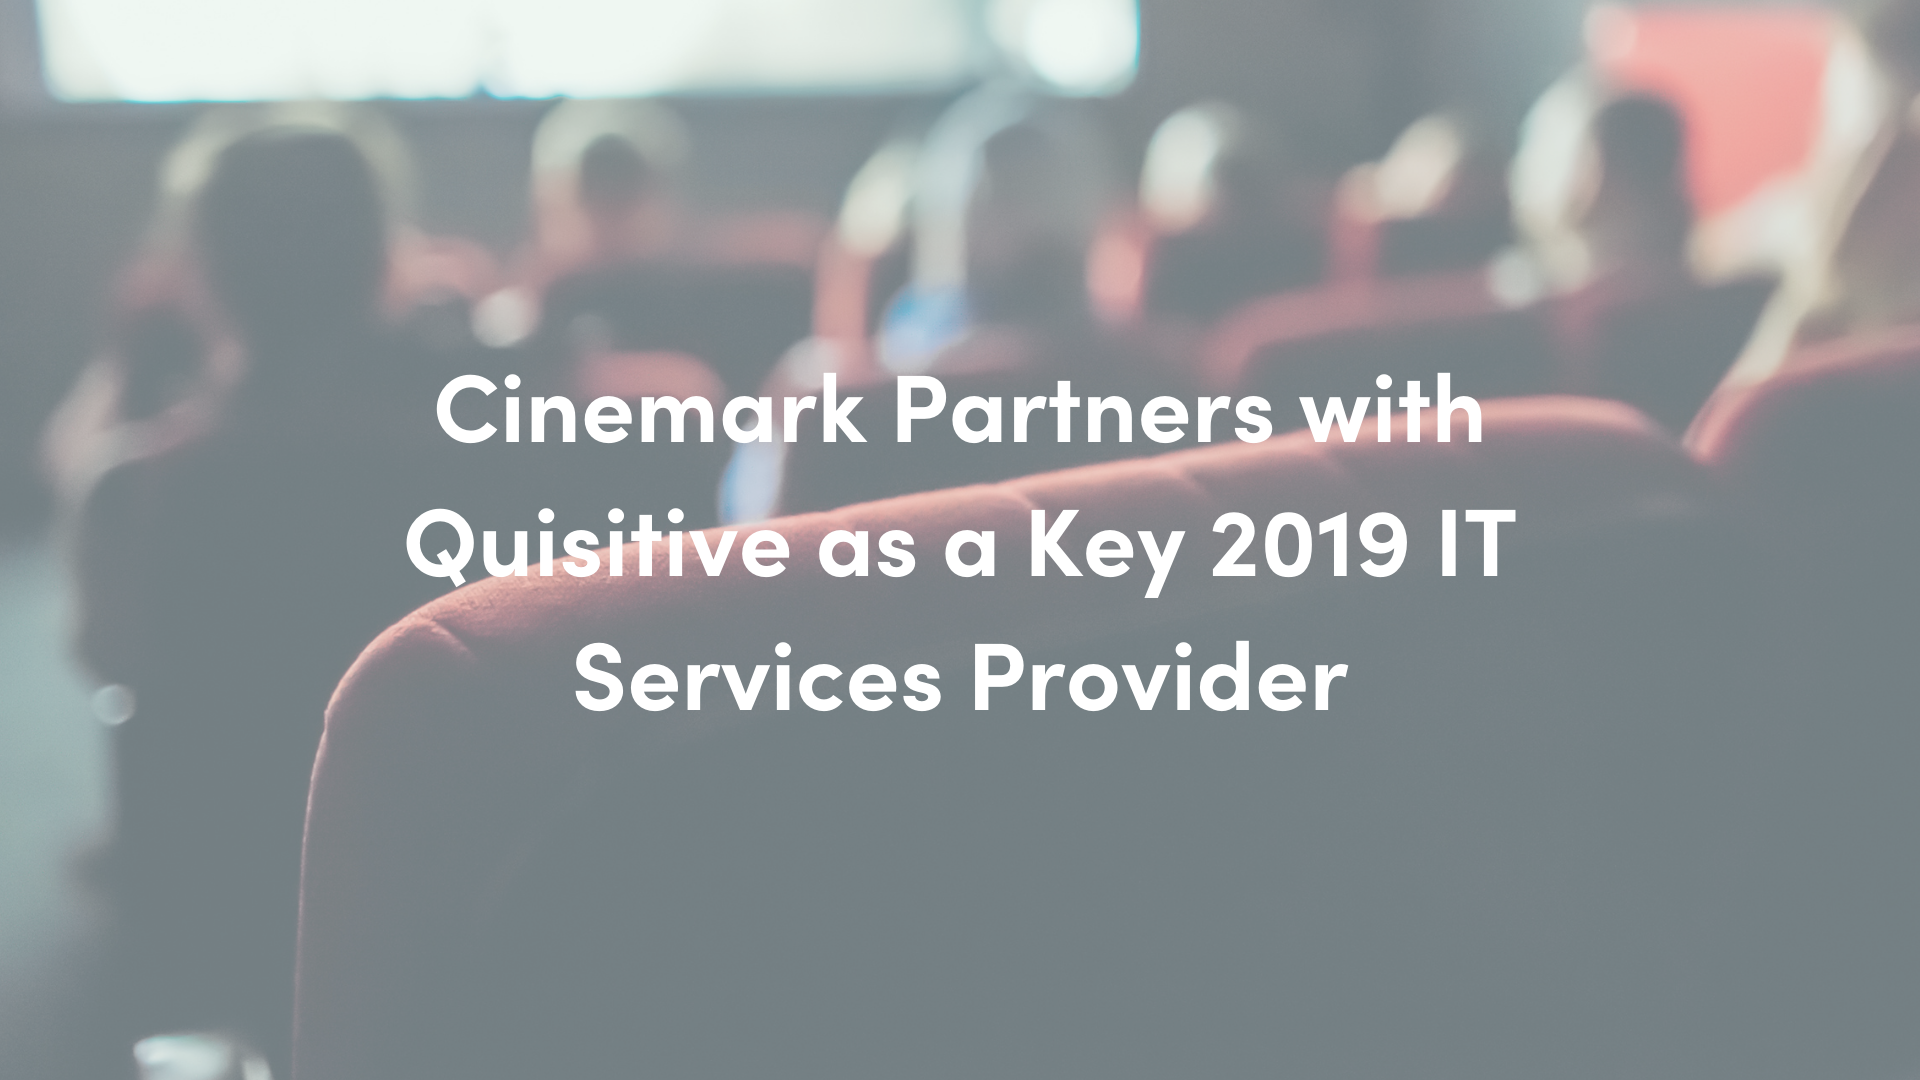 Image of movie theatre with text that reads Cinemark Partners with Quisitive as a Key 2019 IT Services Provider